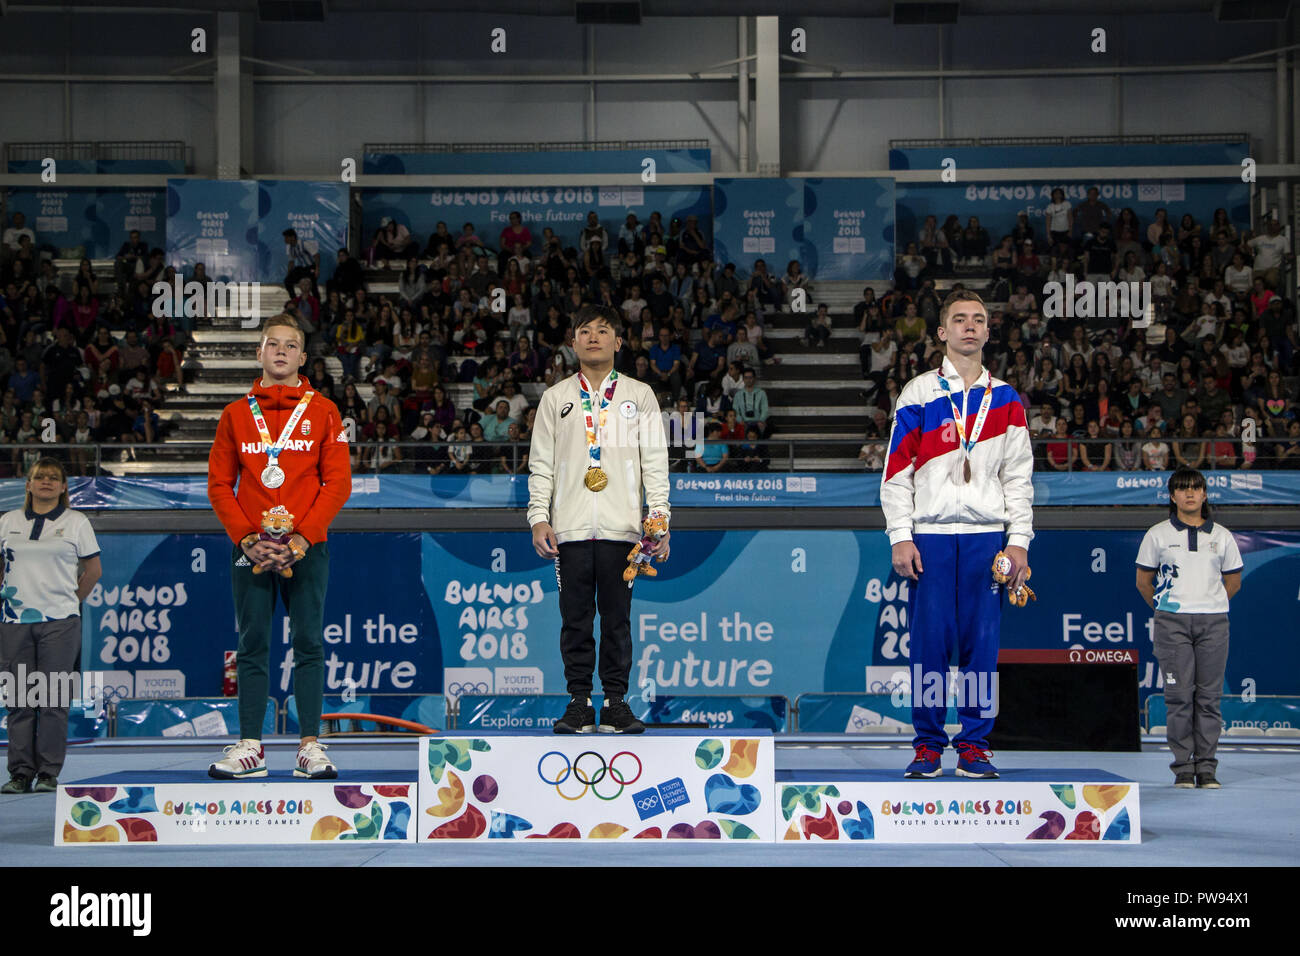 Buenos Aires, Buenos Aires, Argentina. 13th Oct, 2018. The Japanese gymnast Kitazono Takeru of Artistic Male Gymnastics achieved the Gold Medal in the specialty floor of the 2018 Youth Olympic Games. Credit: Roberto Almeida Aveledo/ZUMA Wire/Alamy Live News Stock Photo